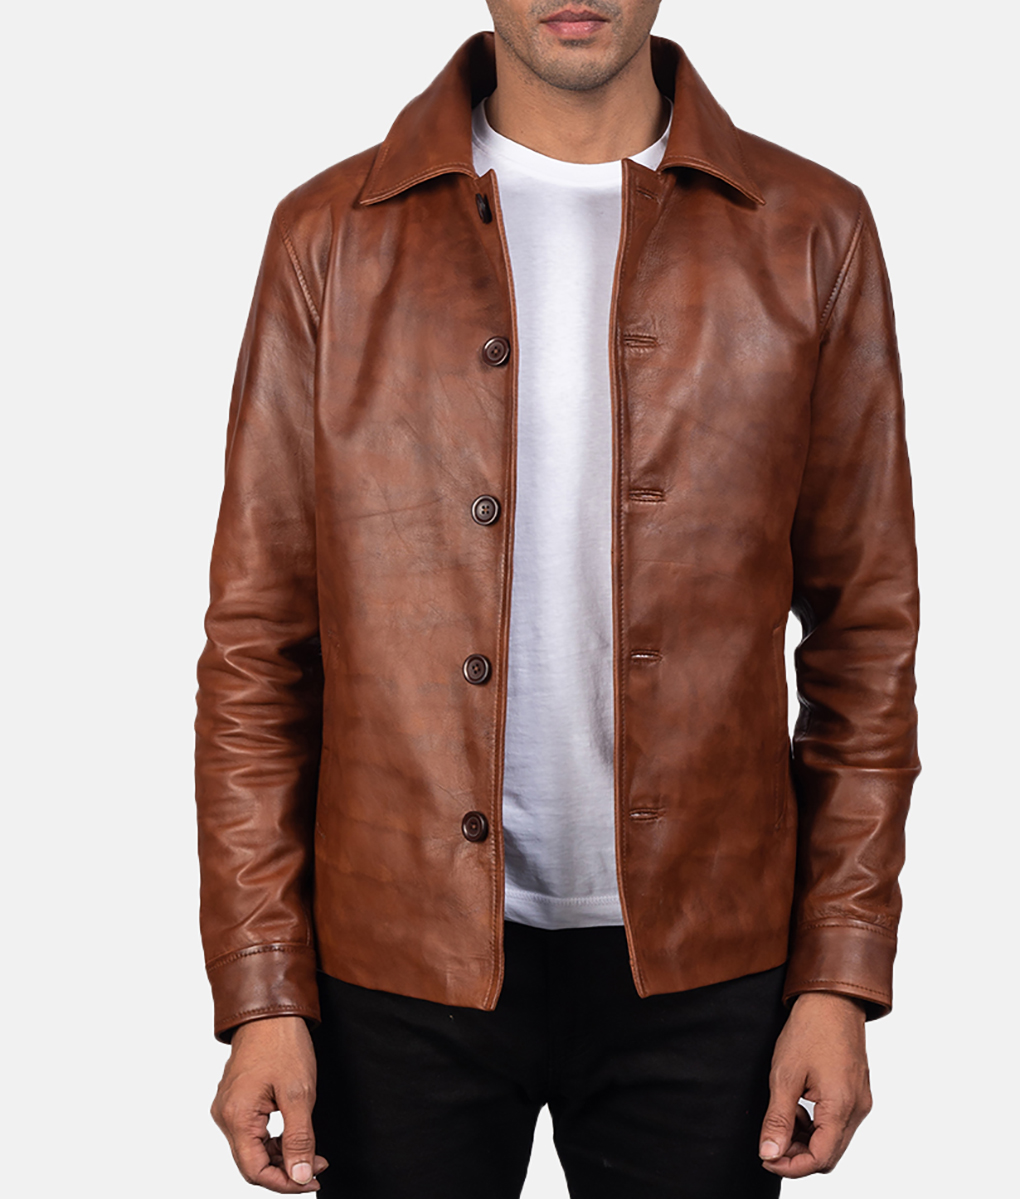 Parker Mens Brown Buttoned Leather Jacket